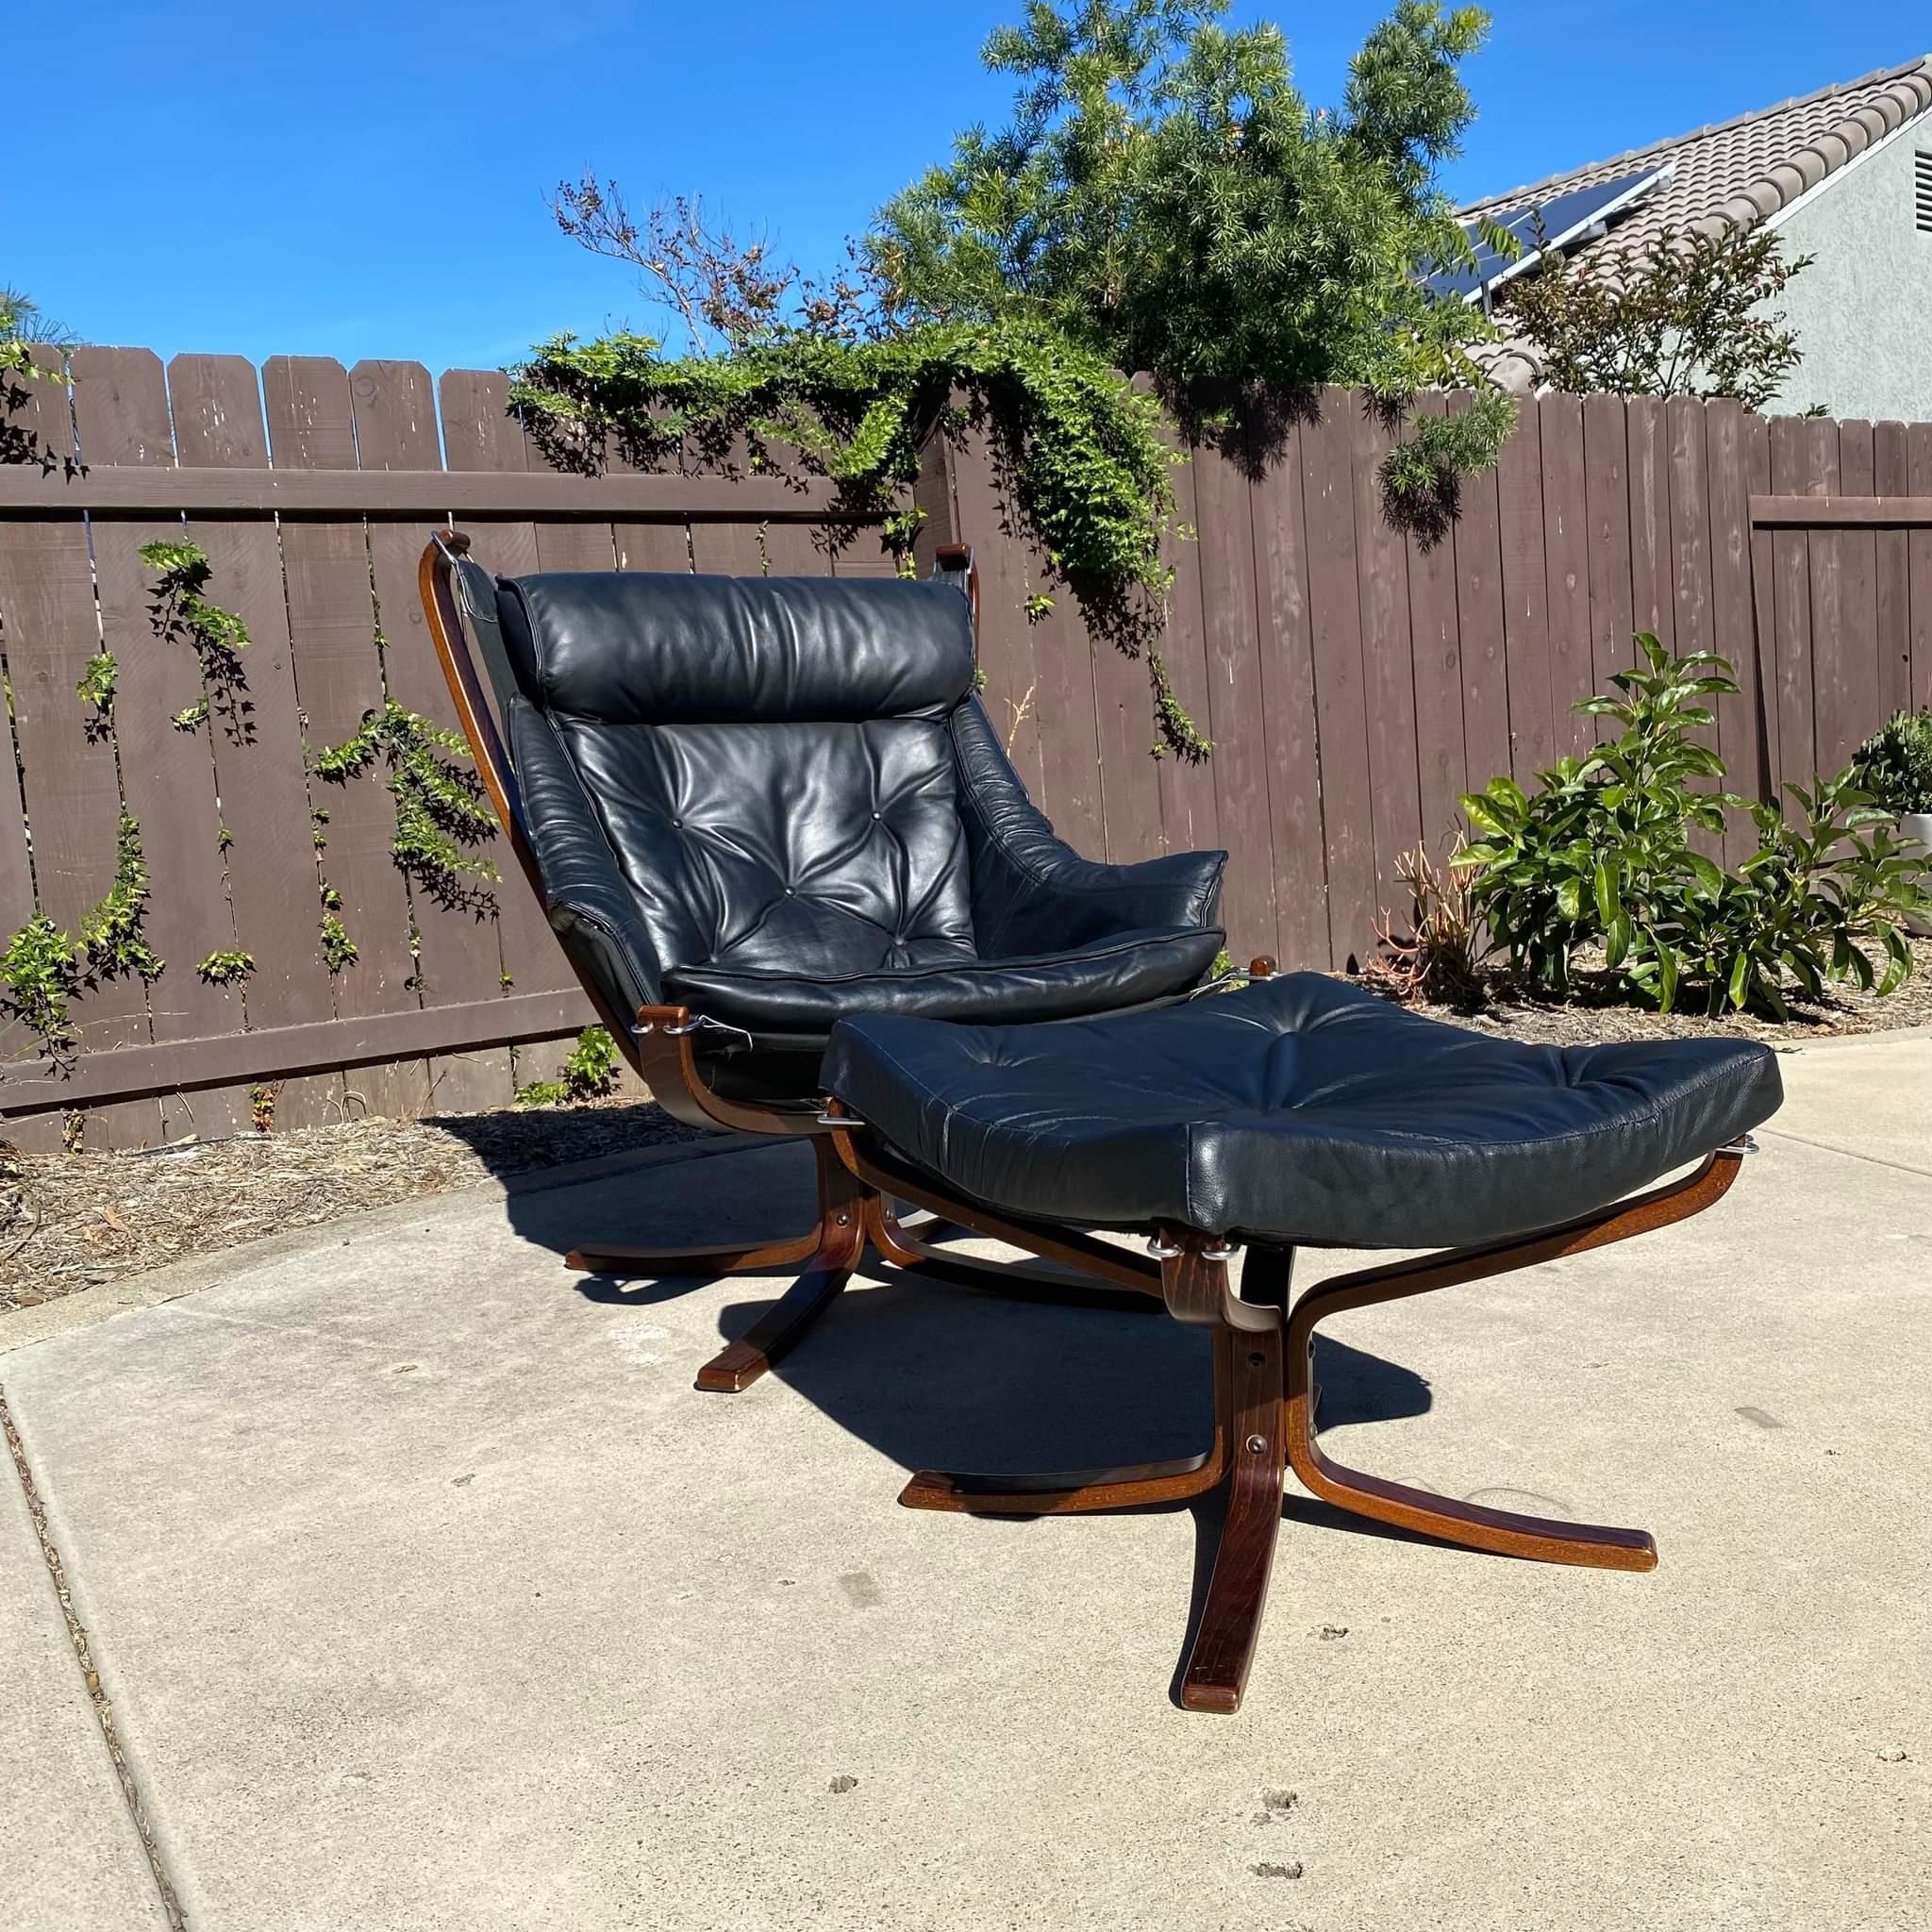 Now available is a black leather Falcon chair designed by Sigurd Ressel for Vatne Mobler, 1970's. All original chair in very good condition. A canvas hammock-style canvas sling hangs from the wood frame which houses the leather cushion. Please note